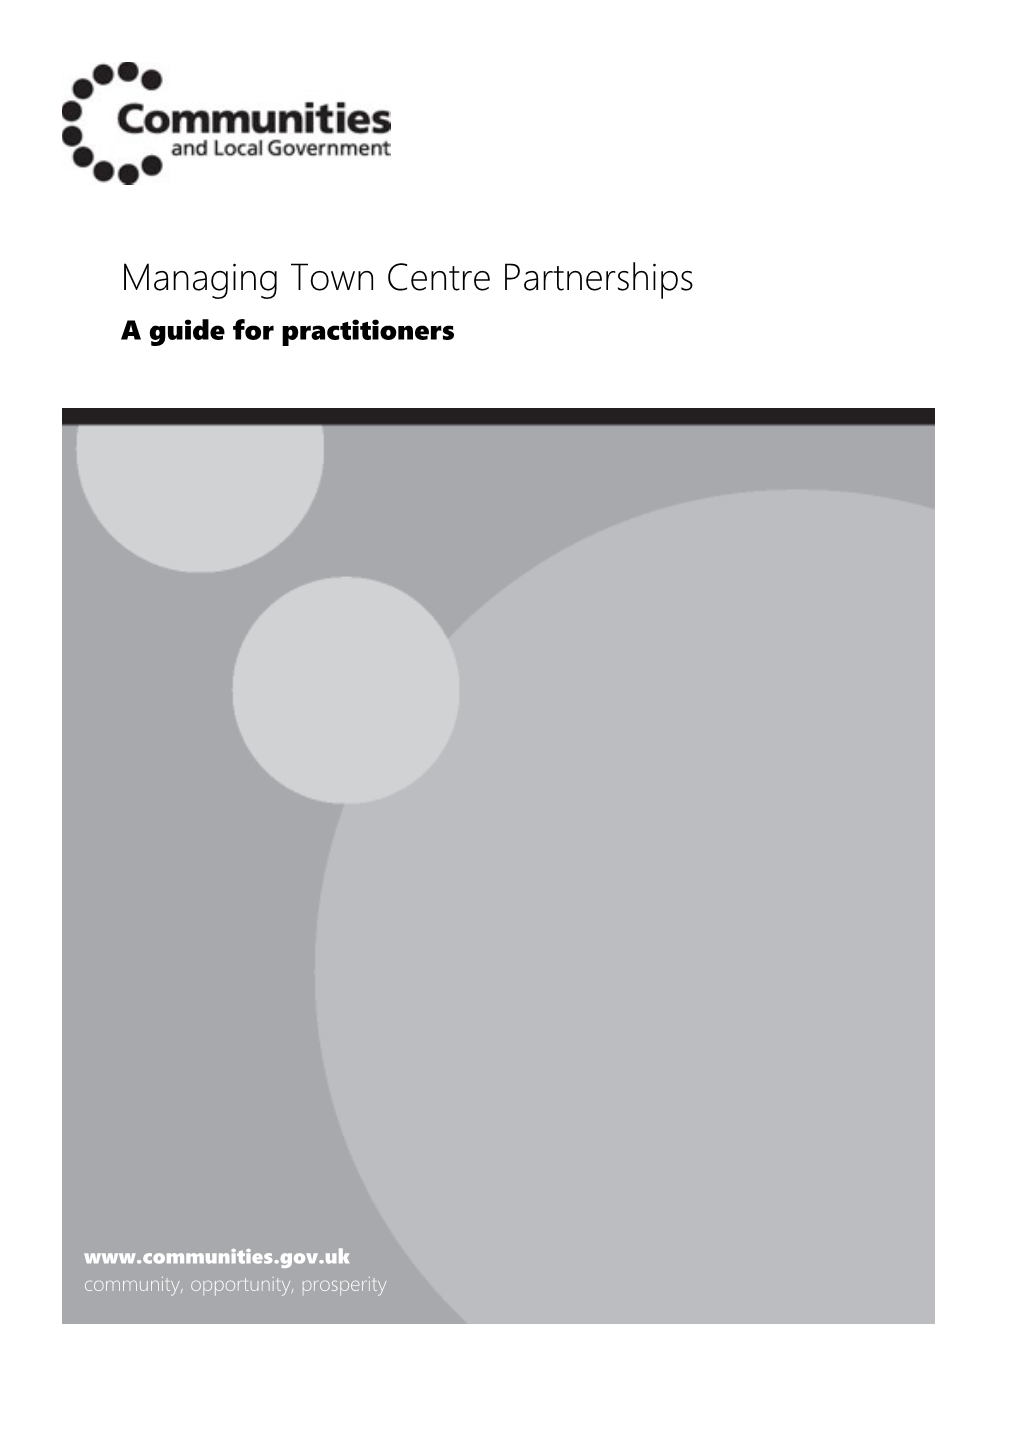 Managing Town Centre Partnerships